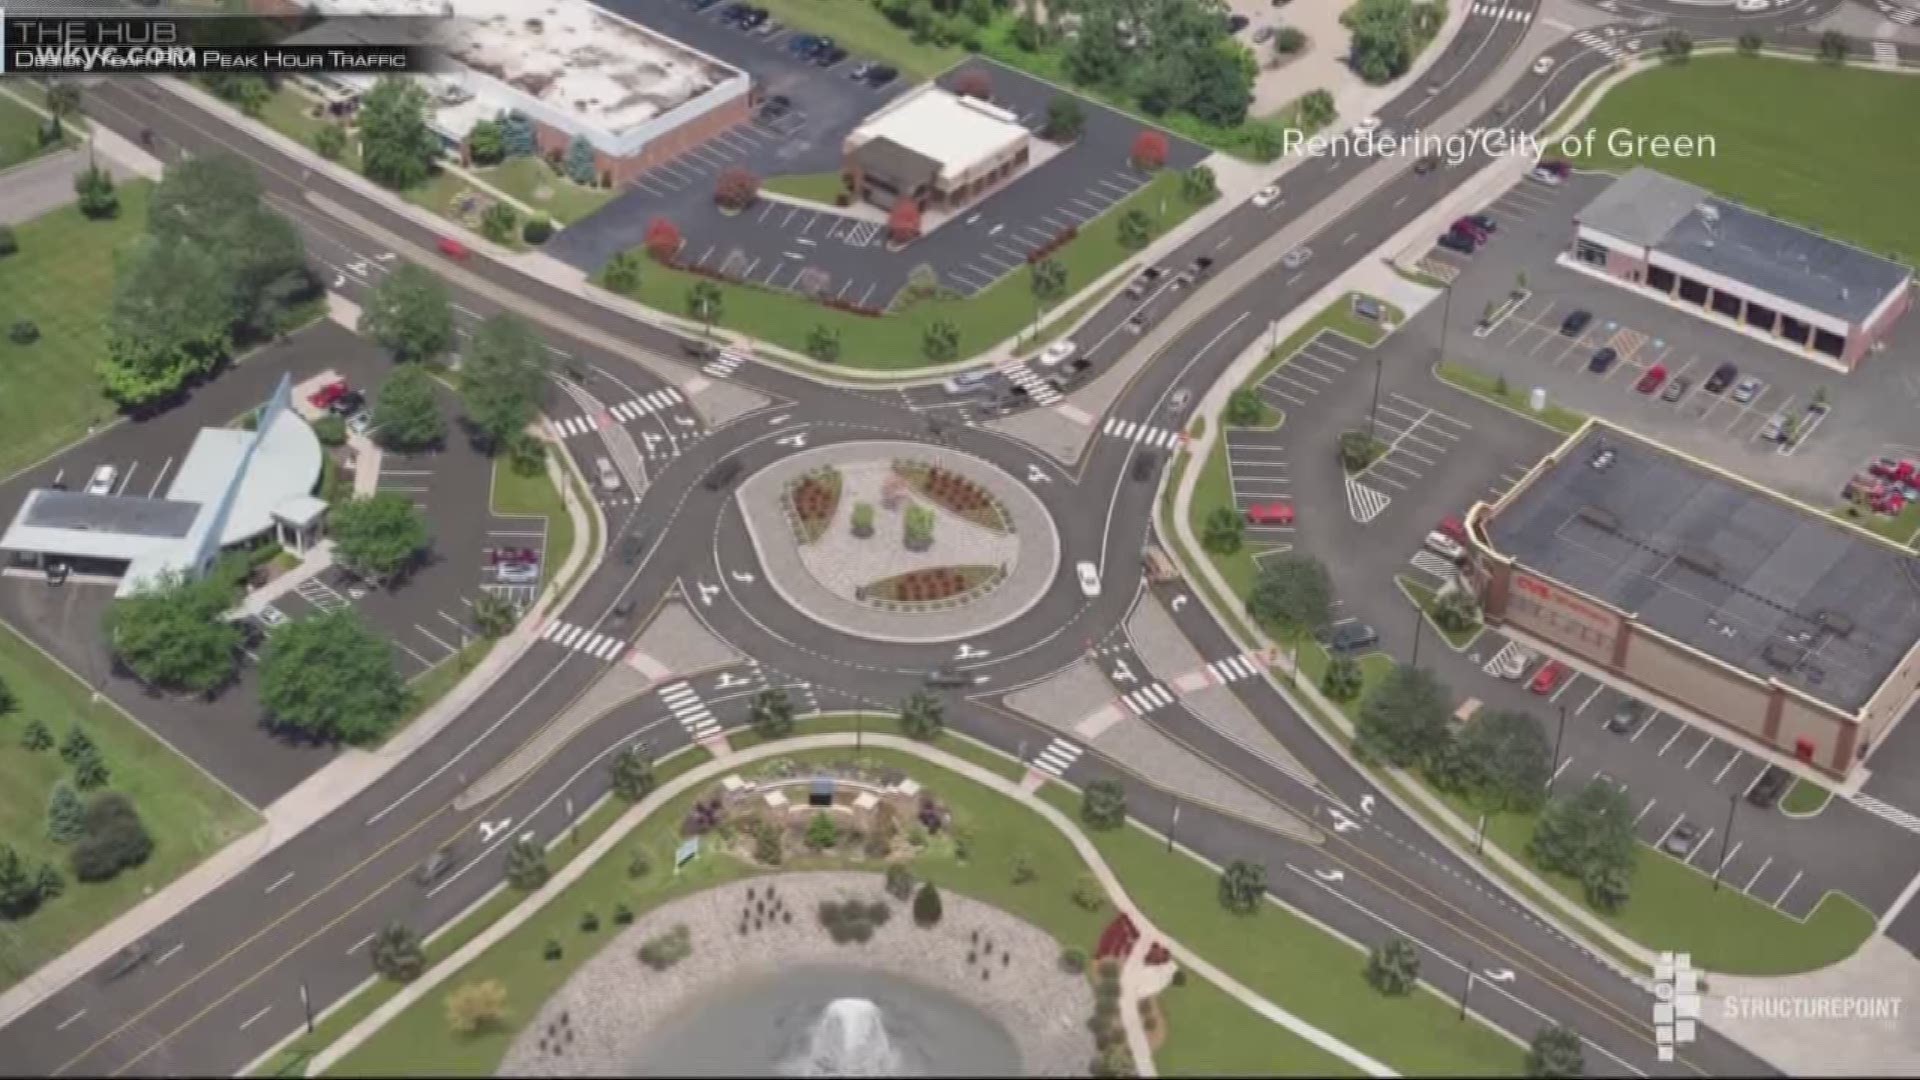 New roundabout under construction in Summit County